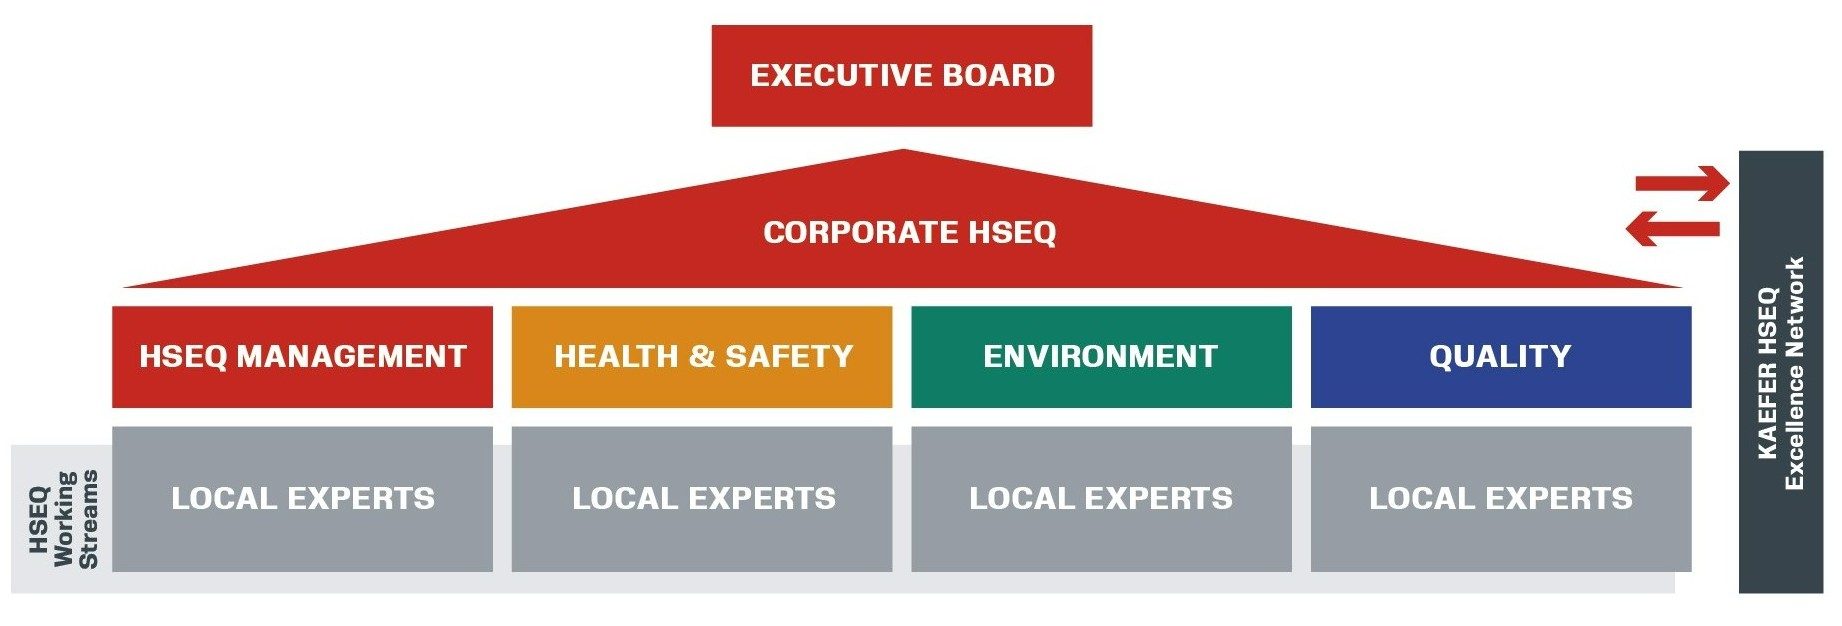 HSEQ Excellence Network